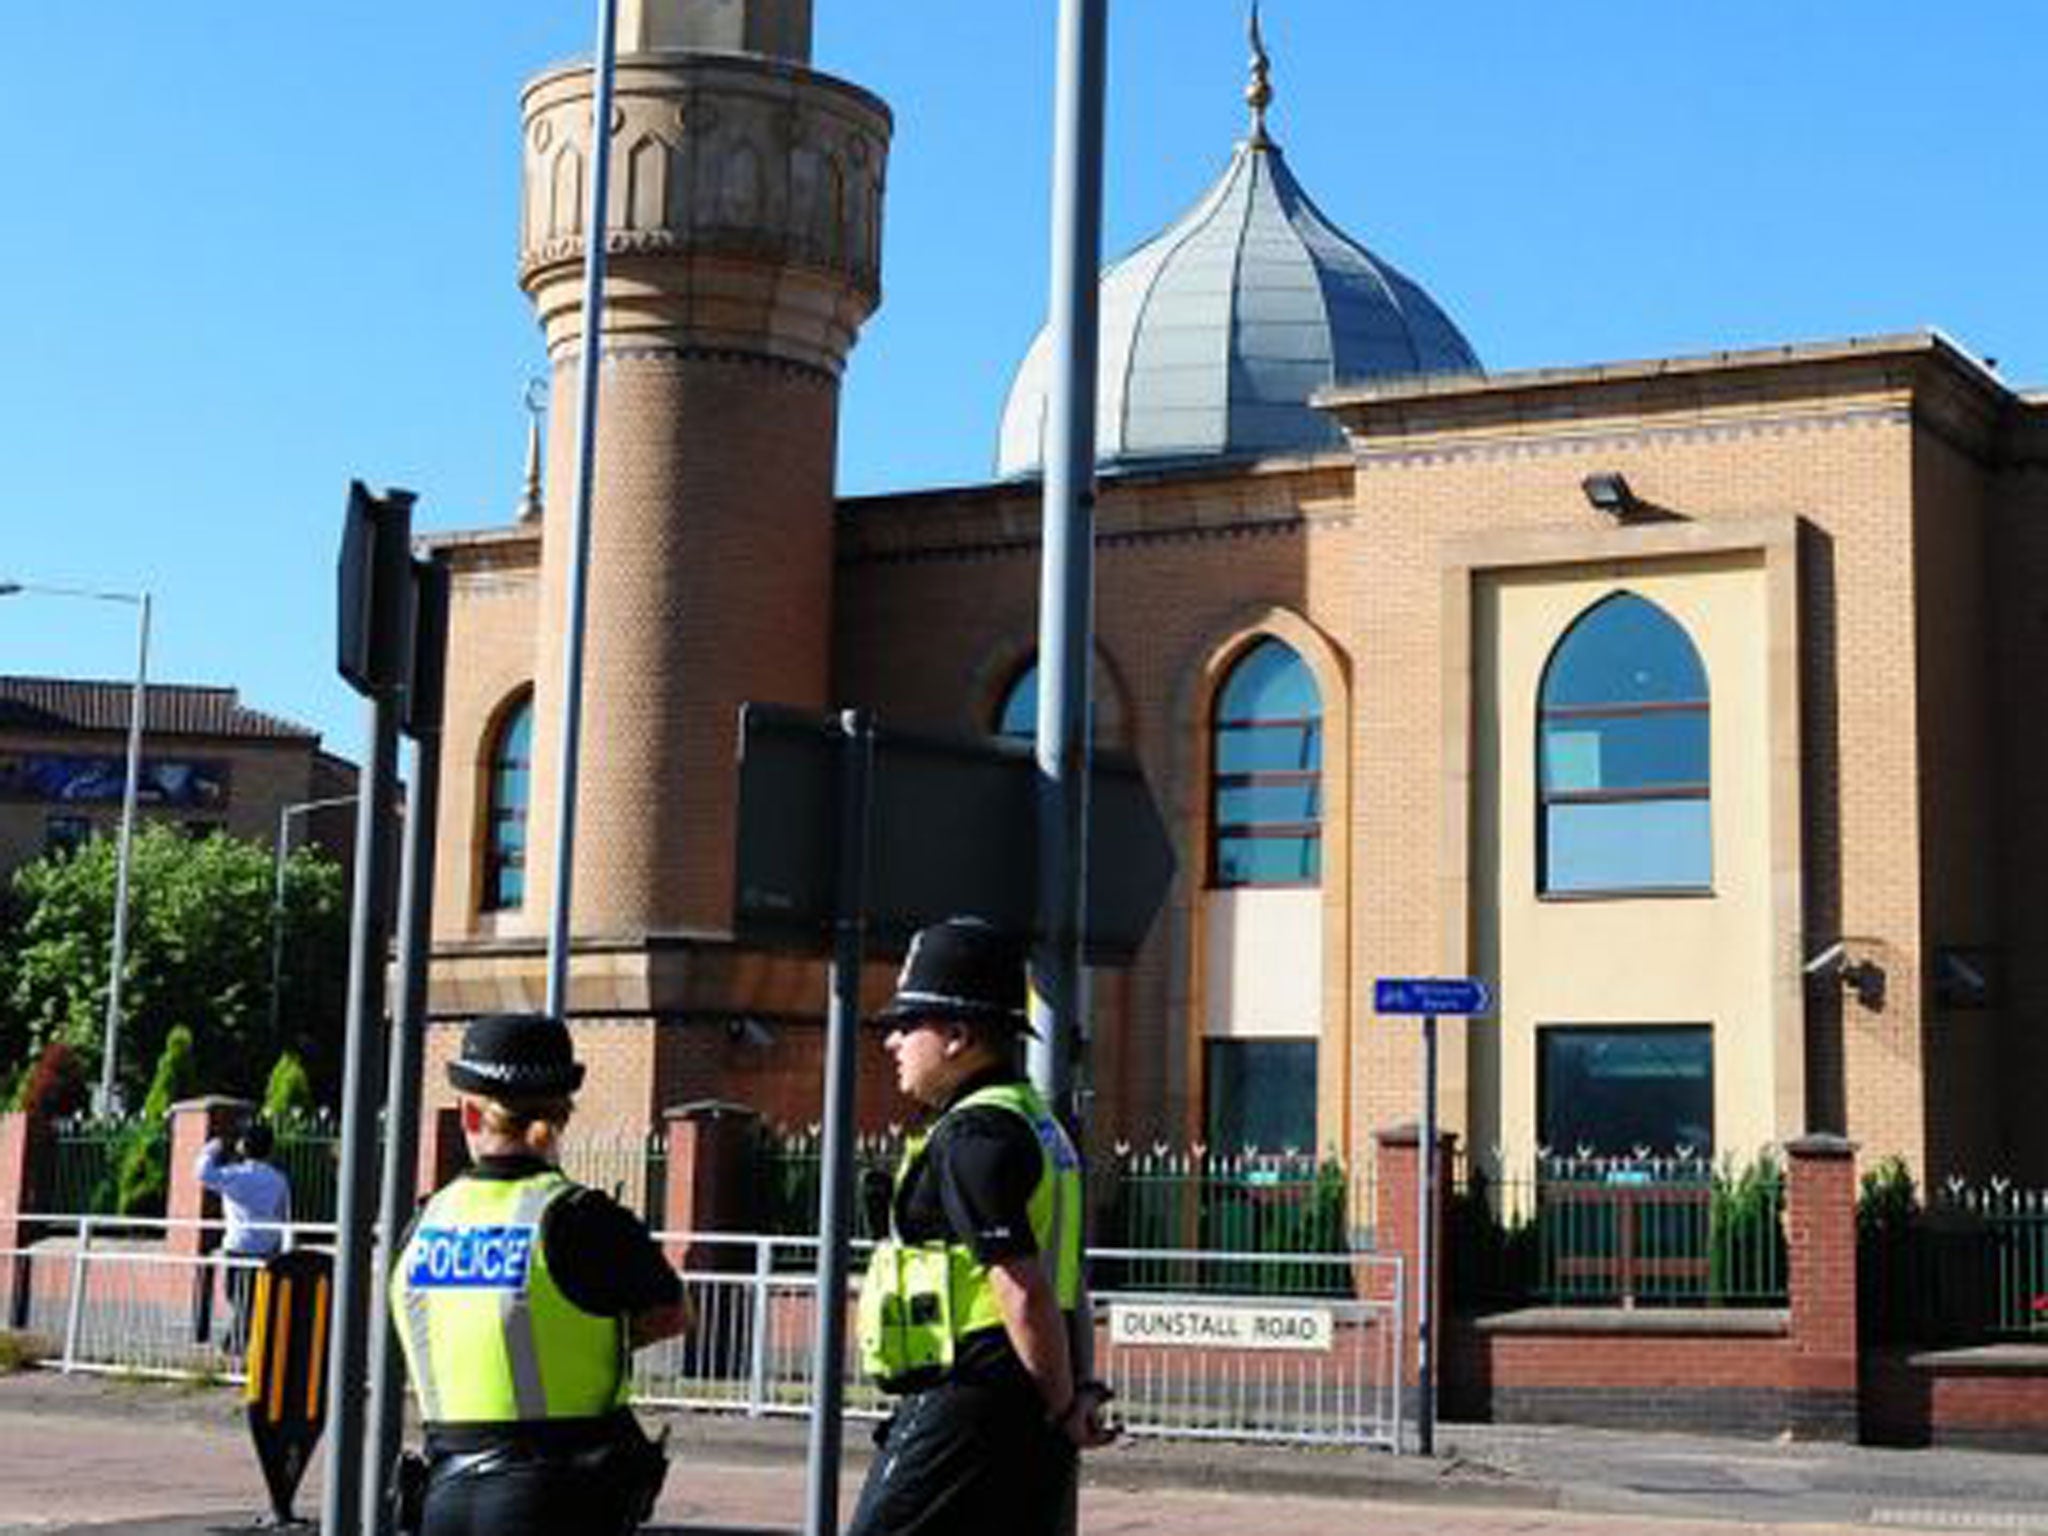 Police officers on patrol outside the Wolverhampton Central Mosque